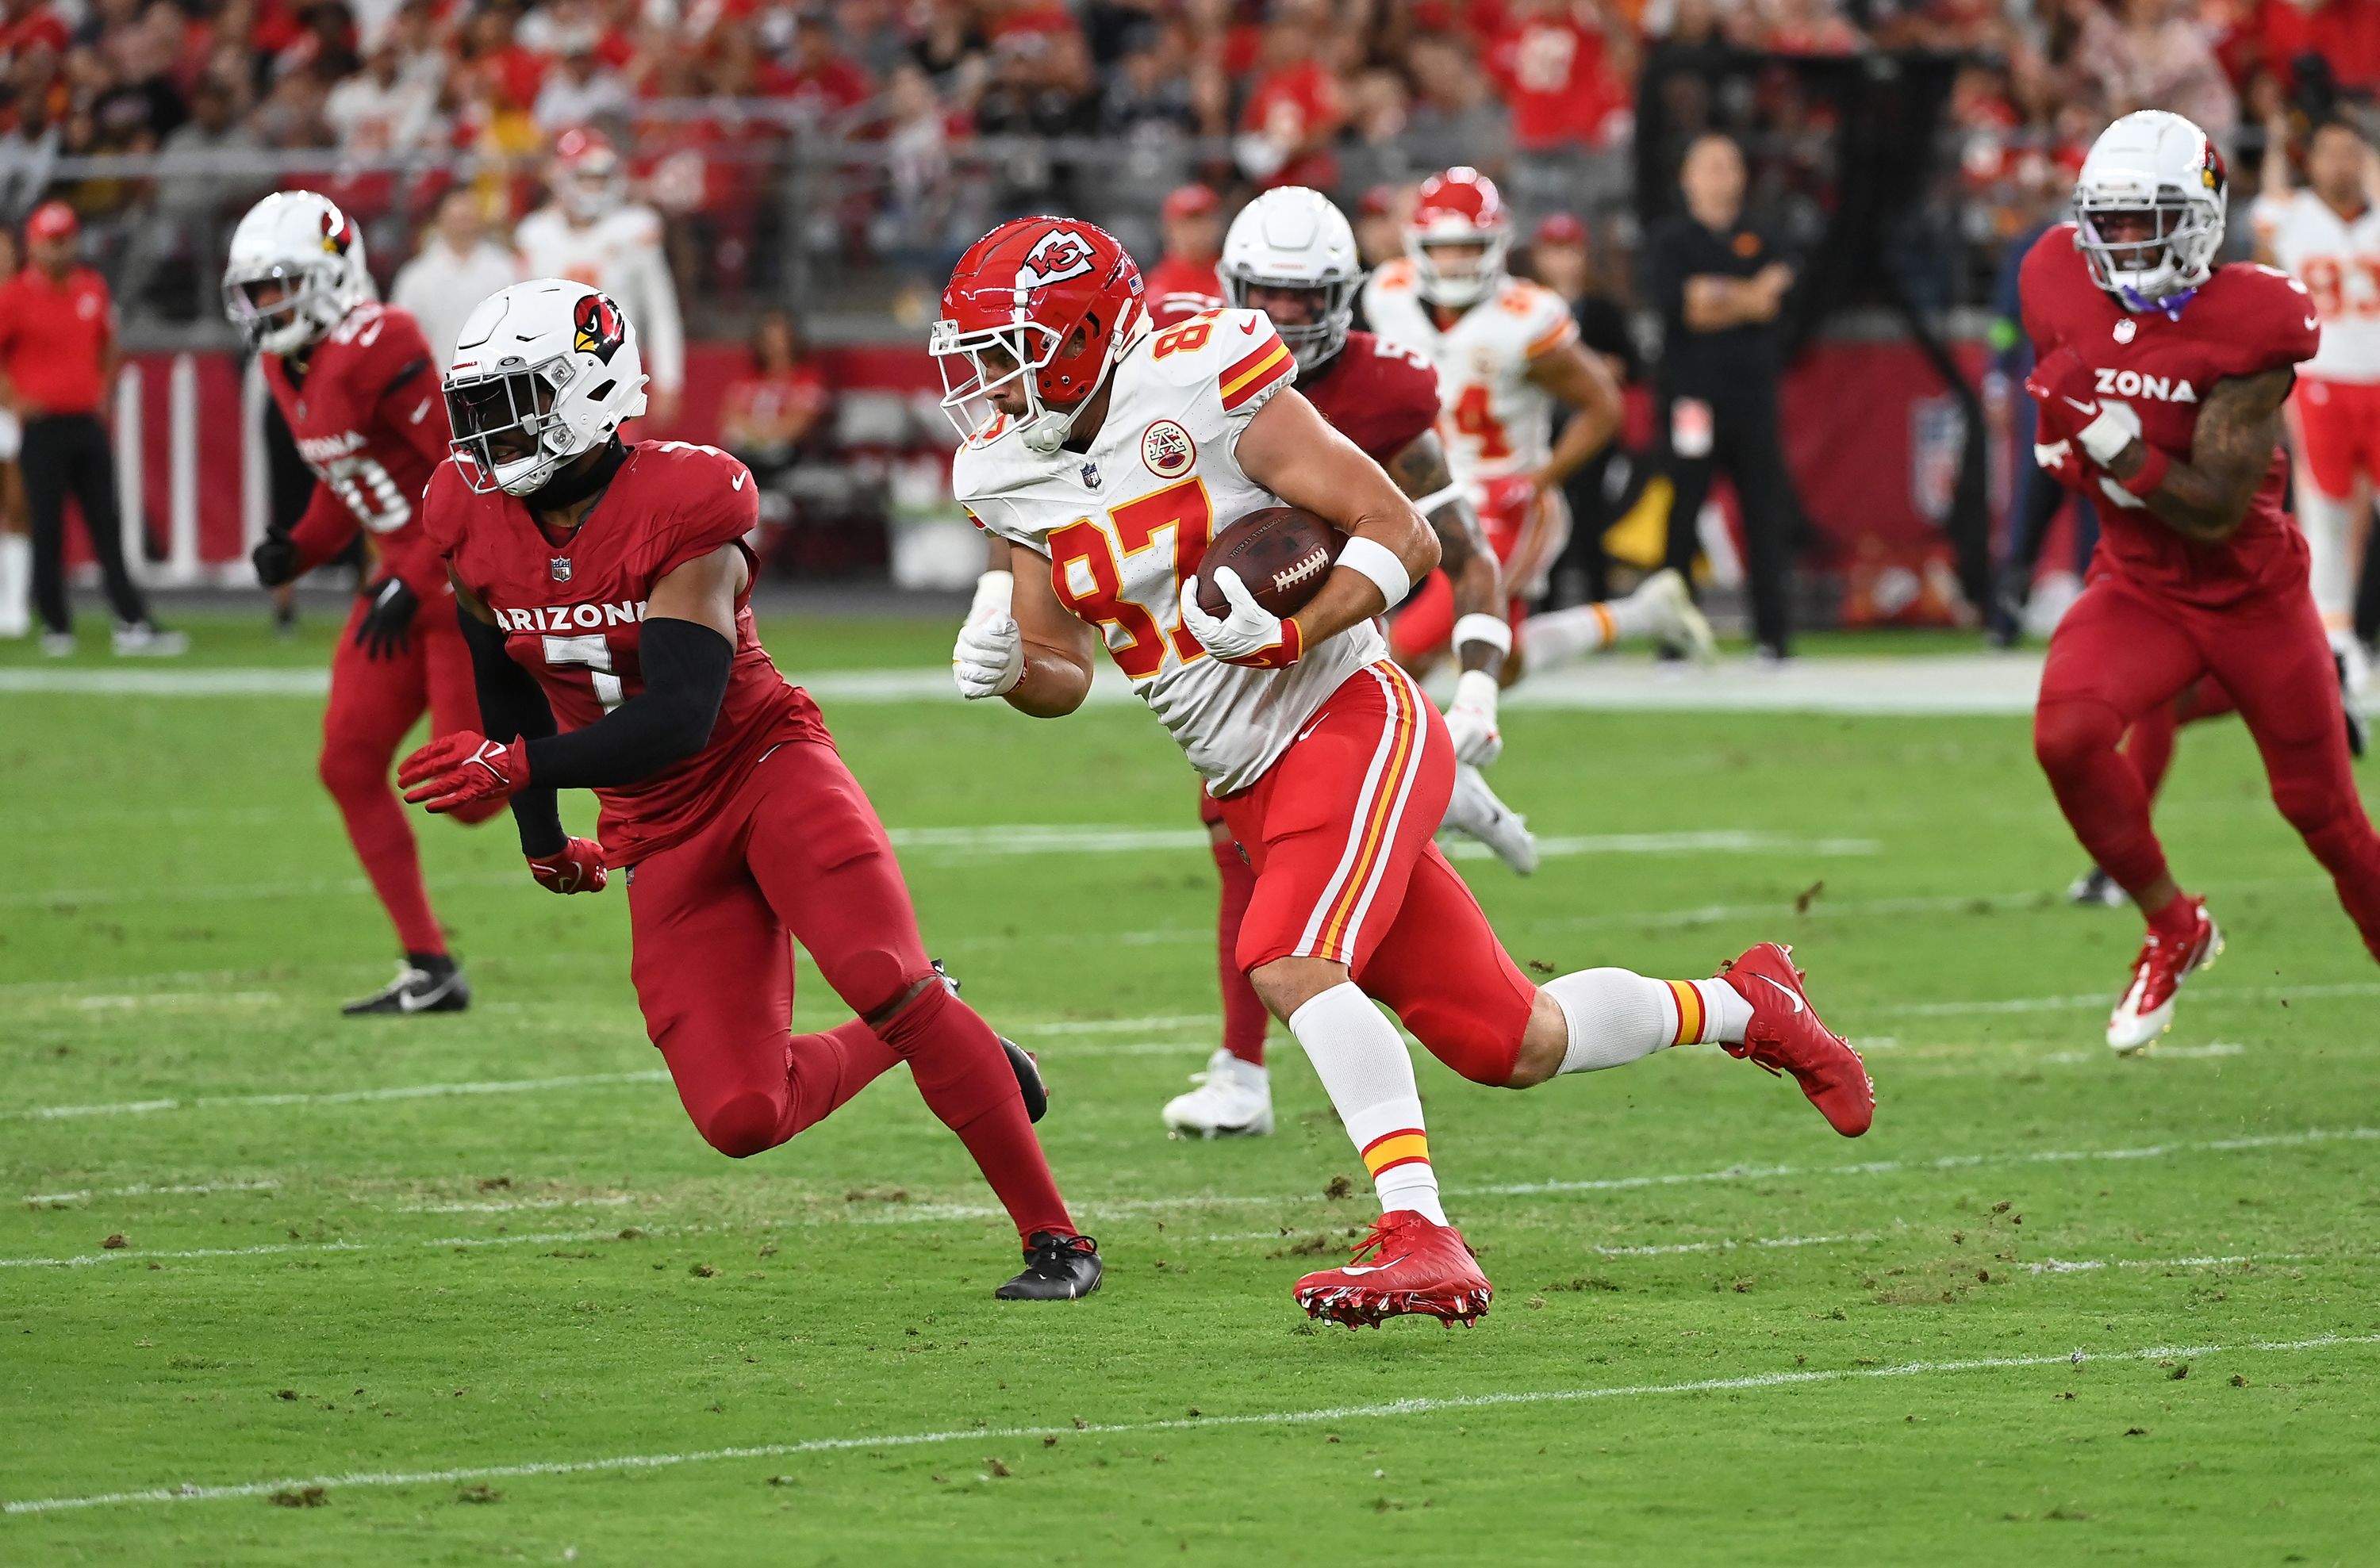 Travis Kelce becomes Chiefs franchise leader in receiving yards